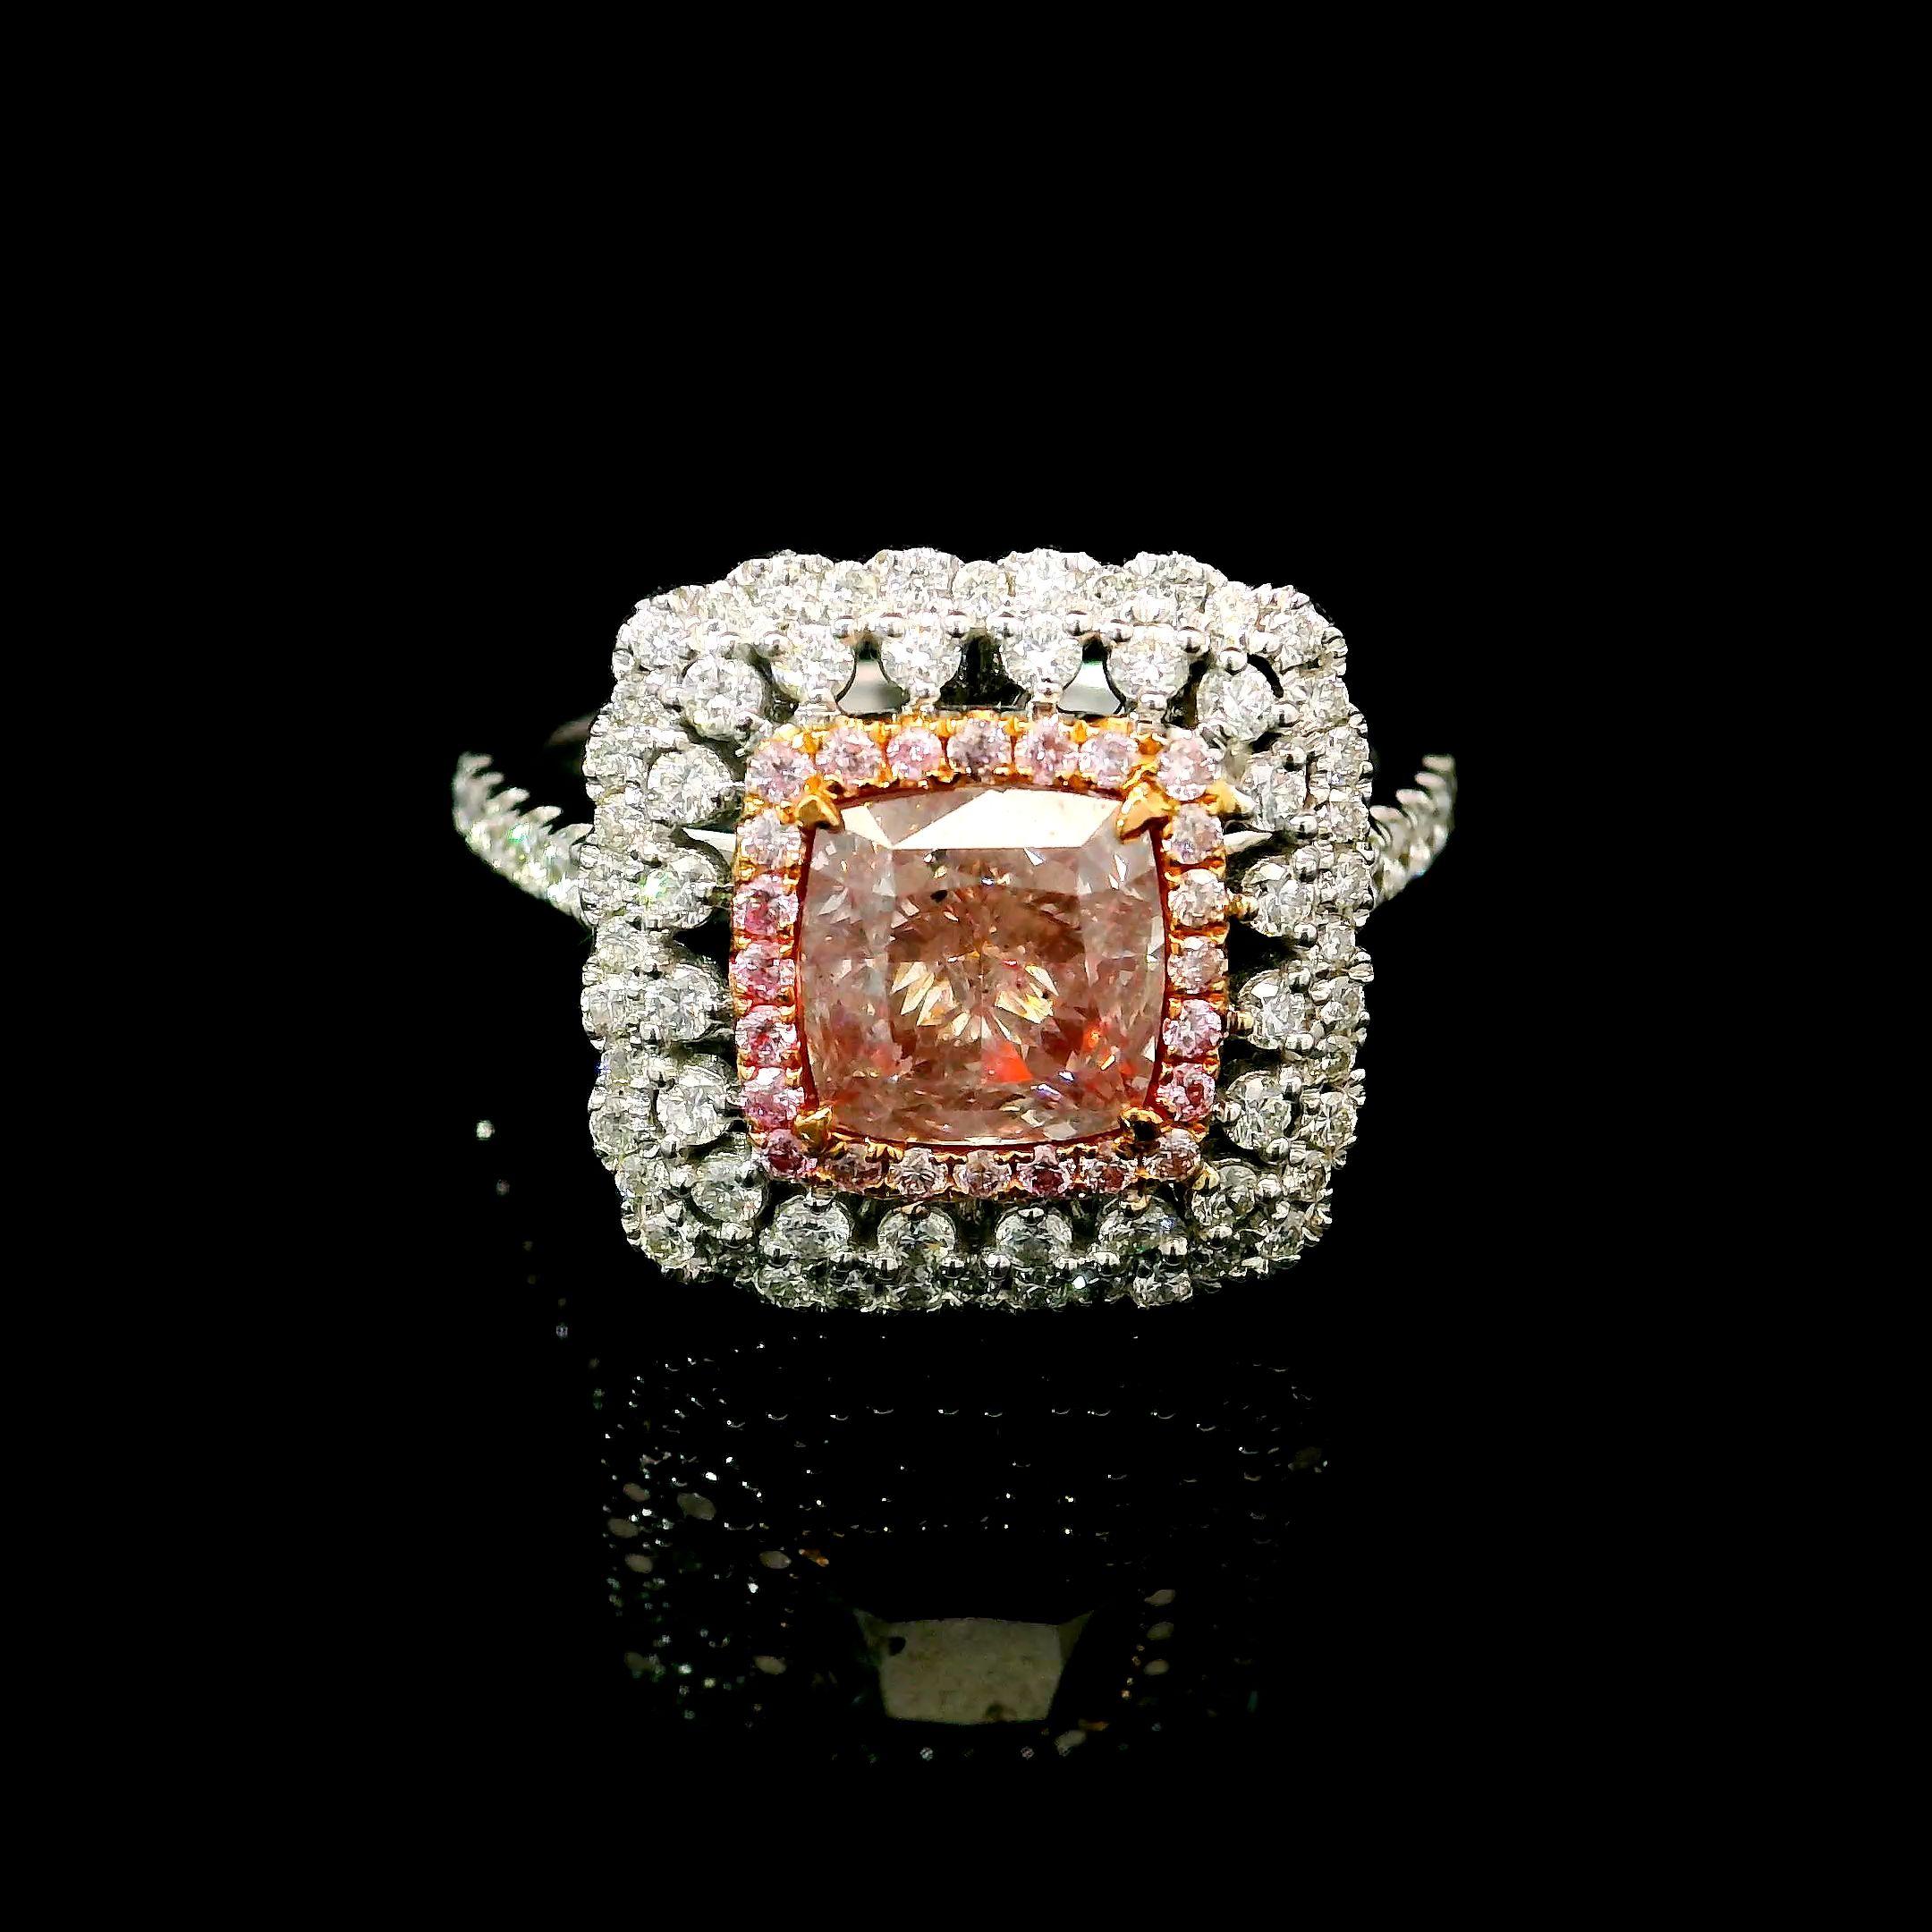 Women's or Men's 1.51 Carat Fancy Light Brownish Pink Diamond Ring I1 Clarity GIA Certified For Sale